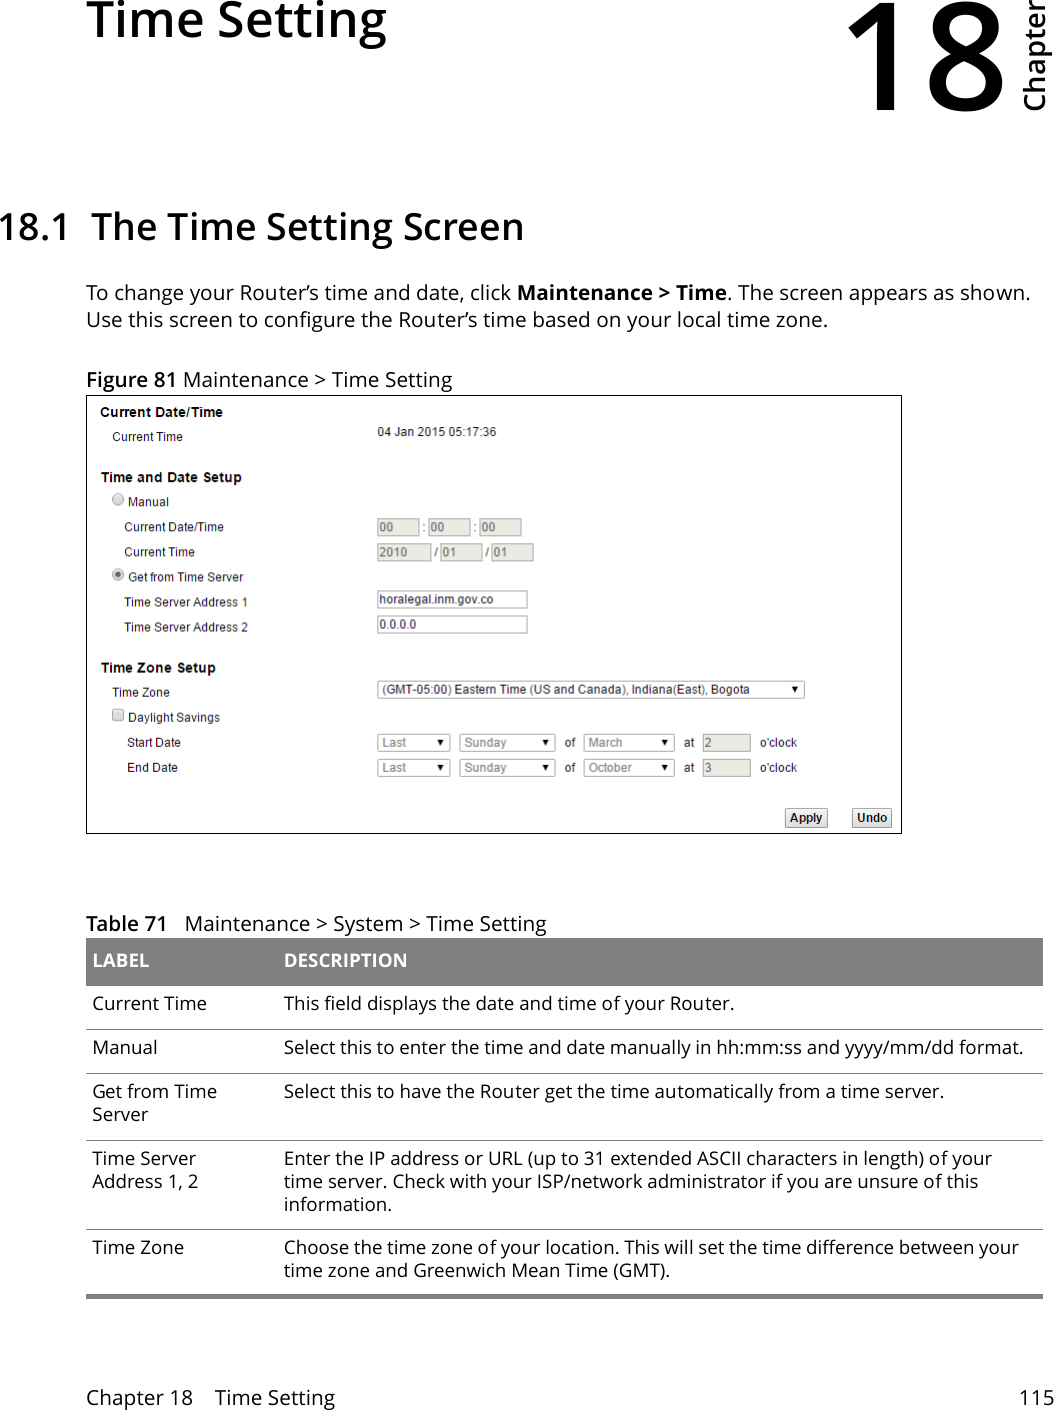 18Chapter Chapter 18    Time Setting 115CHAPTER 18 Chapter 18 Time Setting18.1  The Time Setting Screen To change your Router’s time and date, click Maintenance &gt; Time. The screen appears as shown. Use this screen to configure the Router’s time based on your local time zone. Figure 81 Maintenance &gt; Time Setting  Table 71   Maintenance &gt; System &gt; Time Setting LABEL DESCRIPTIONCurrent Time  This field displays the date and time of your Router.Manual Select this to enter the time and date manually in hh:mm:ss and yyyy/mm/dd format.Get from Time ServerSelect this to have the Router get the time automatically from a time server.Time Server Address 1, 2Enter the IP address or URL (up to 31 extended ASCII characters in length) of your time server. Check with your ISP/network administrator if you are unsure of this information.Time Zone Choose the time zone of your location. This will set the time difference between your time zone and Greenwich Mean Time (GMT). 